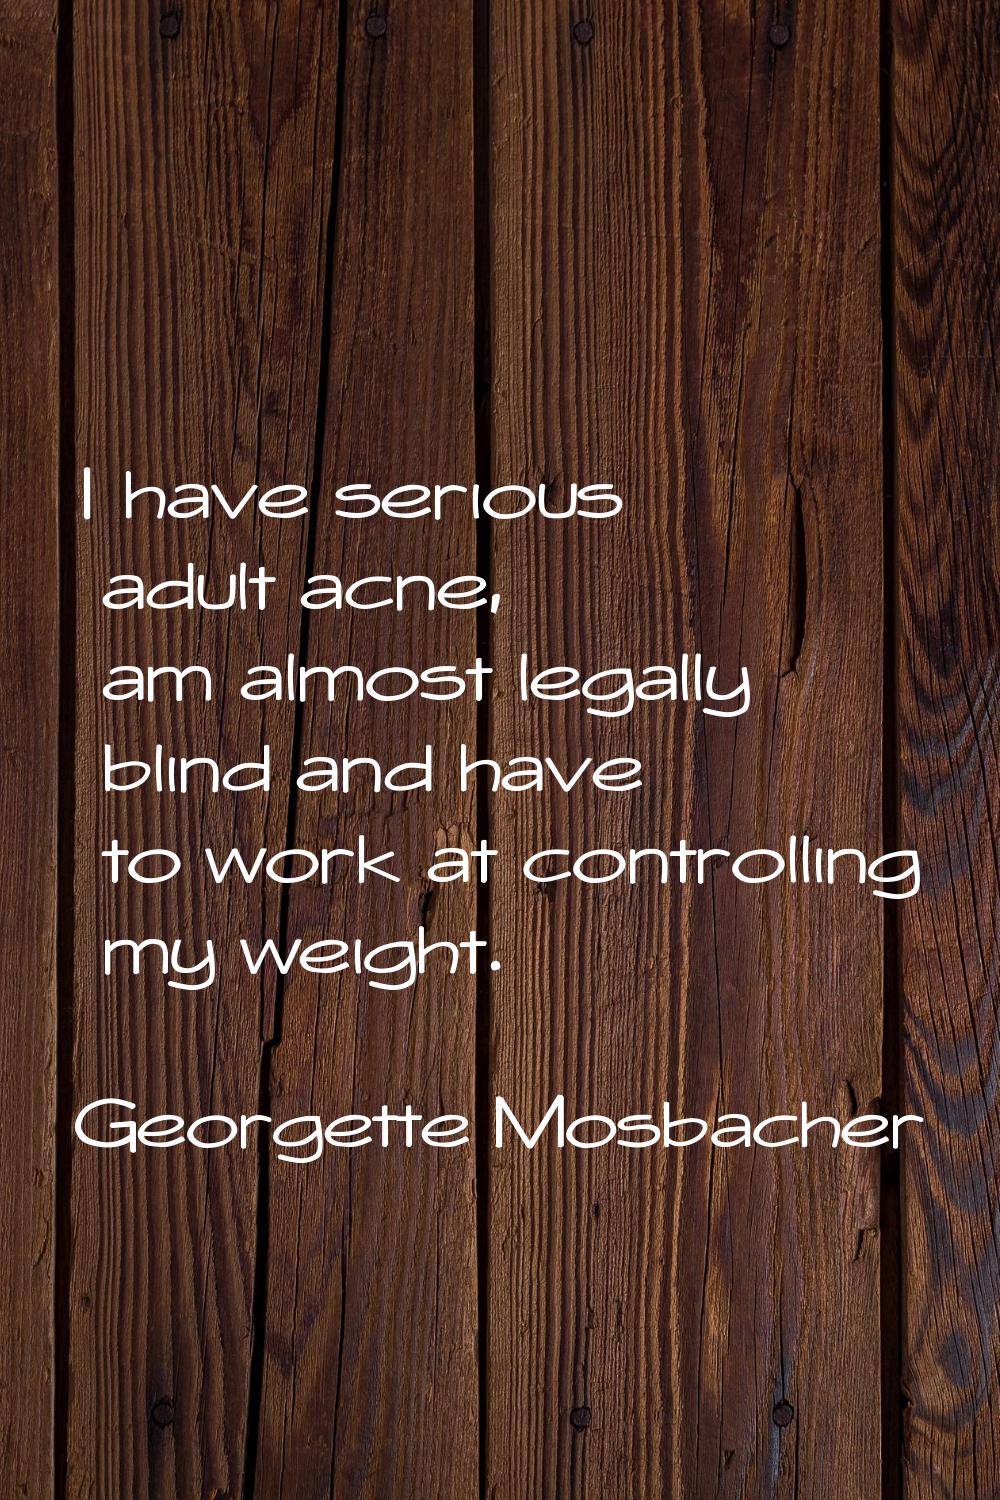 I have serious adult acne, am almost legally blind and have to work at controlling my weight.